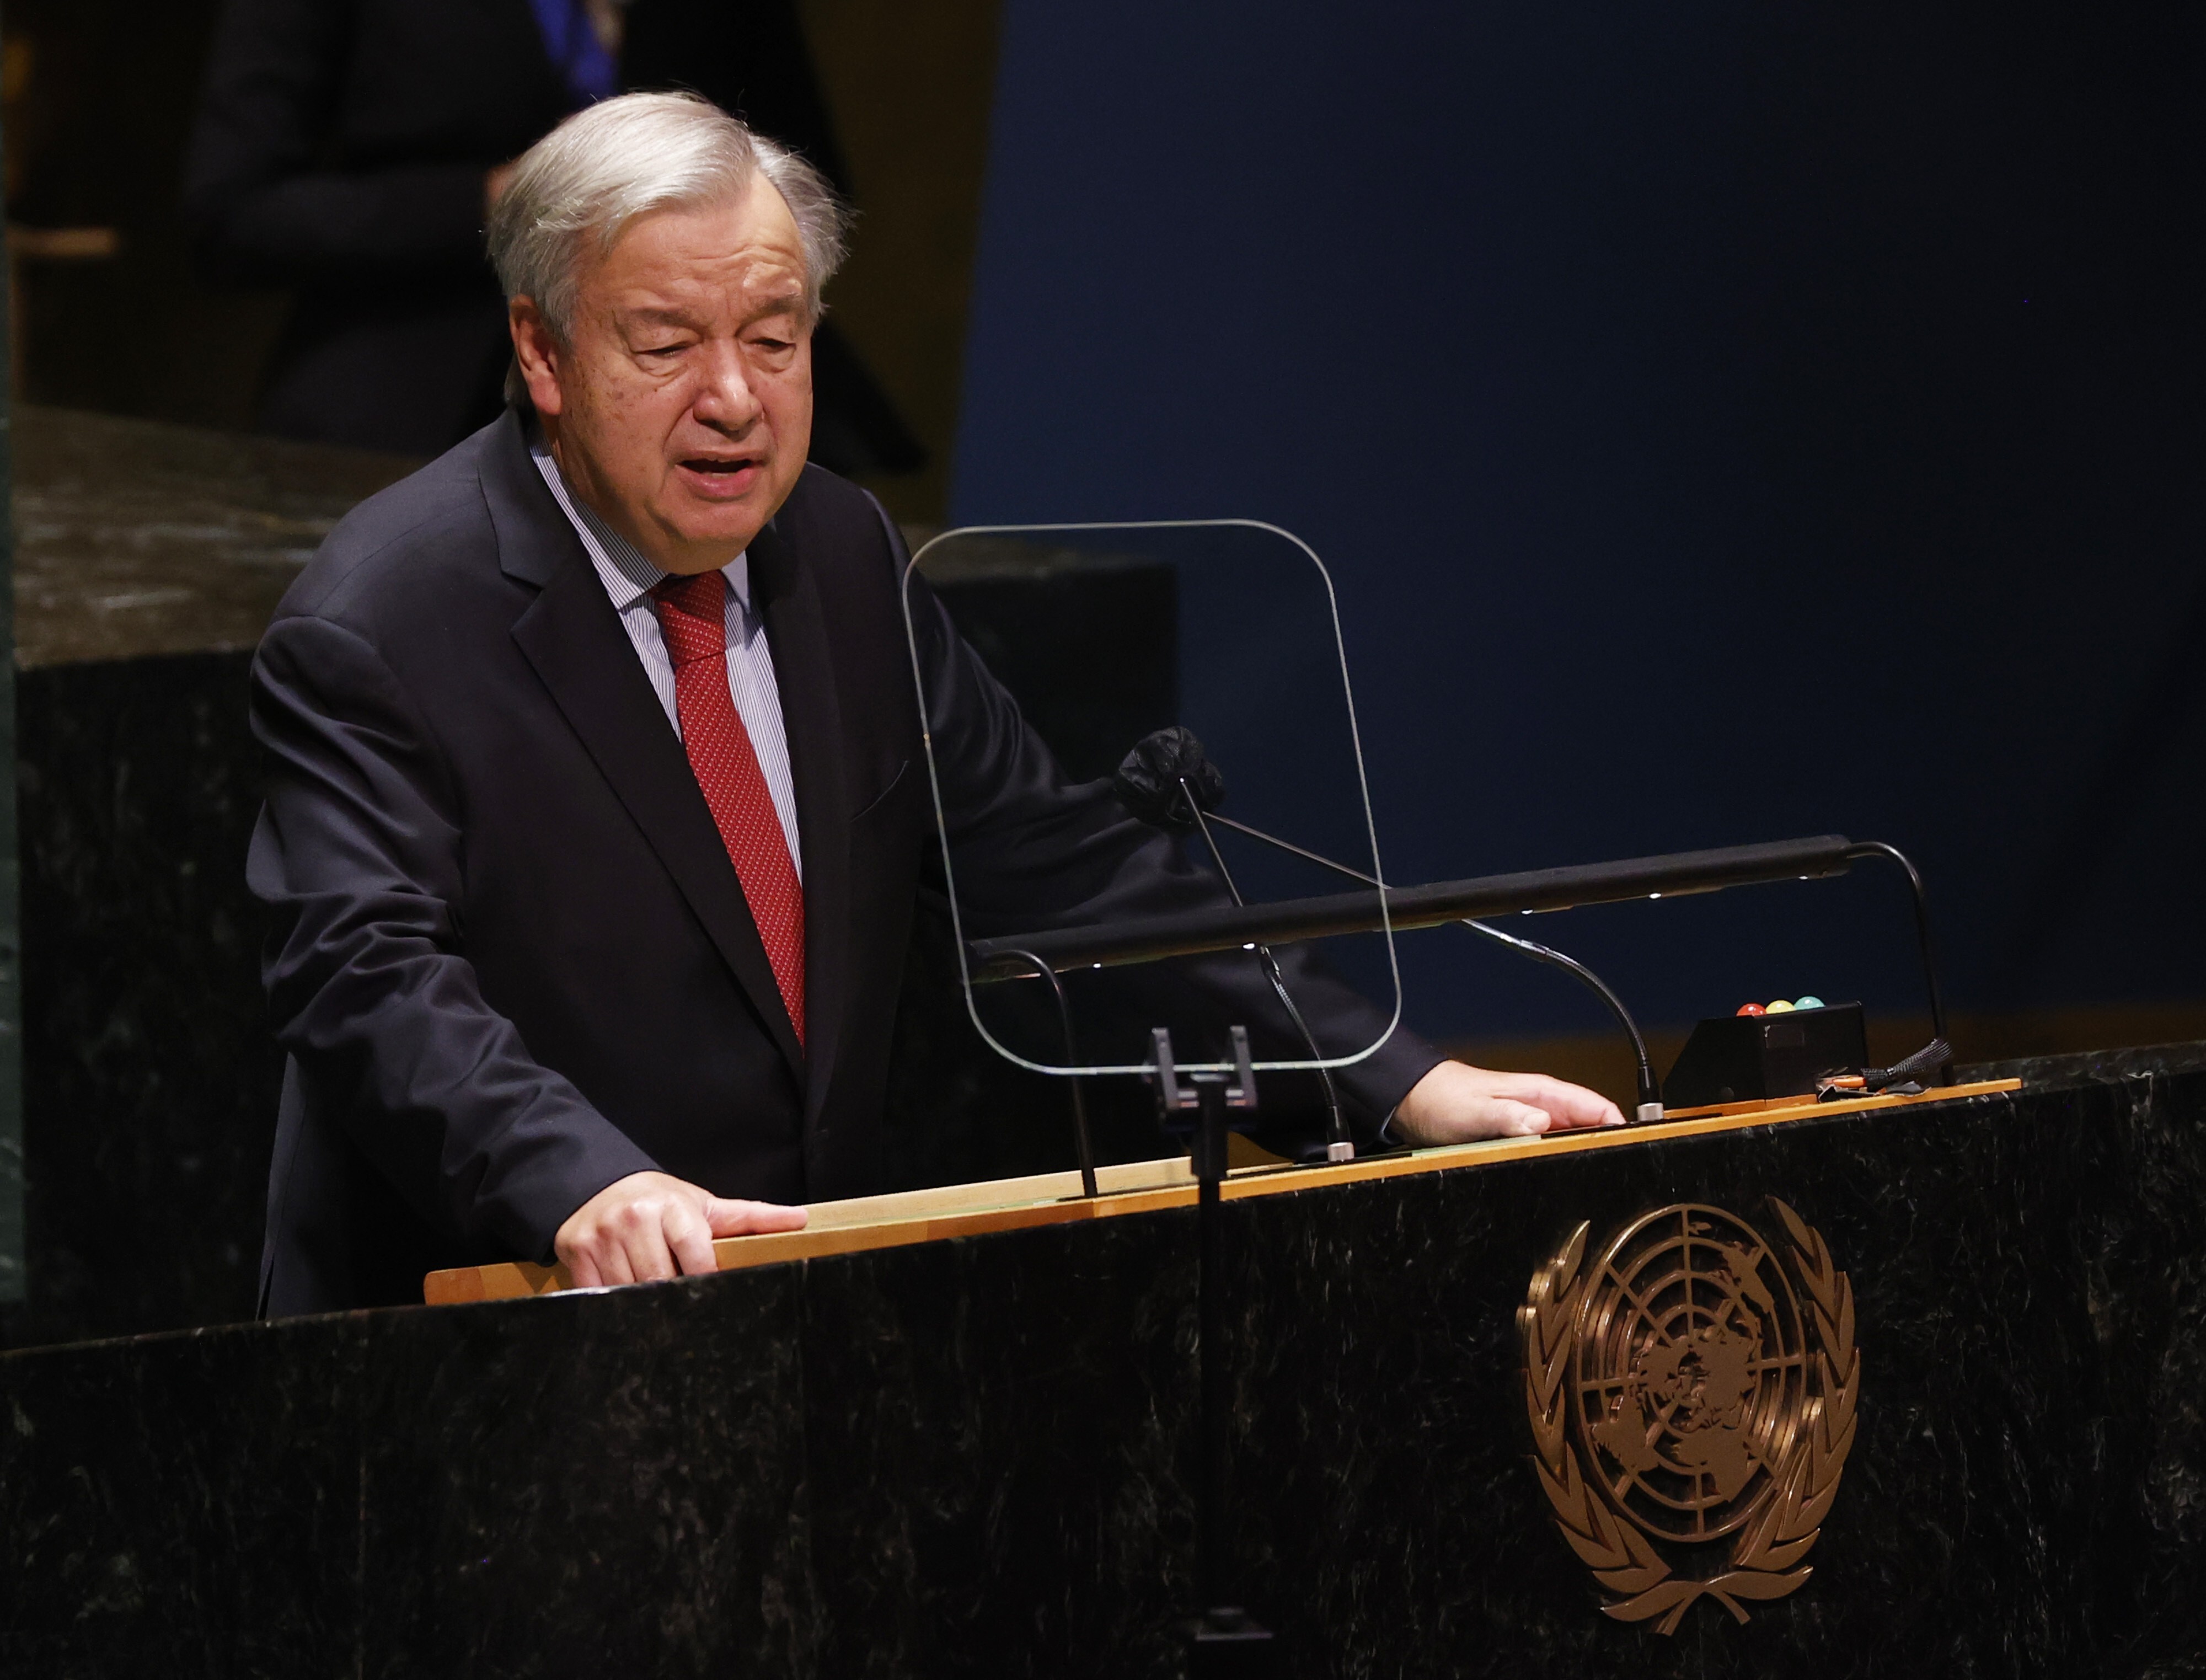 United Nations Secretary-General Antonio Guterres speaks at a meeting on the UN World Conference Against Racism at the UN General Assembly in New York on Wednesday. Photo: AP